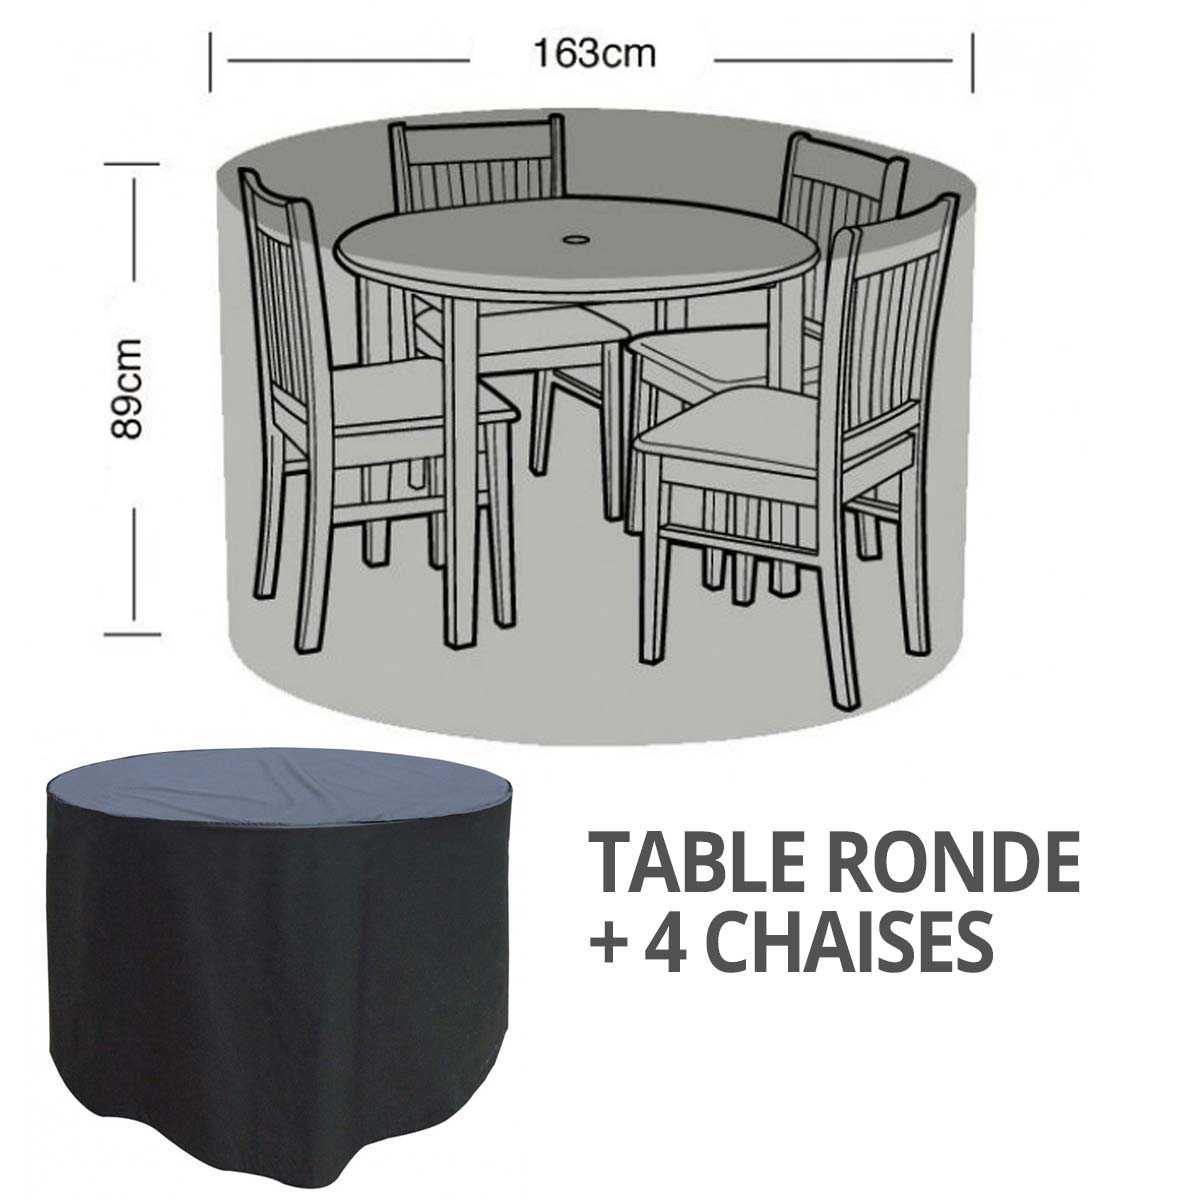 https://fr.jardins-animes.com/images/housse-protection-table-ronde-chaise.jpg